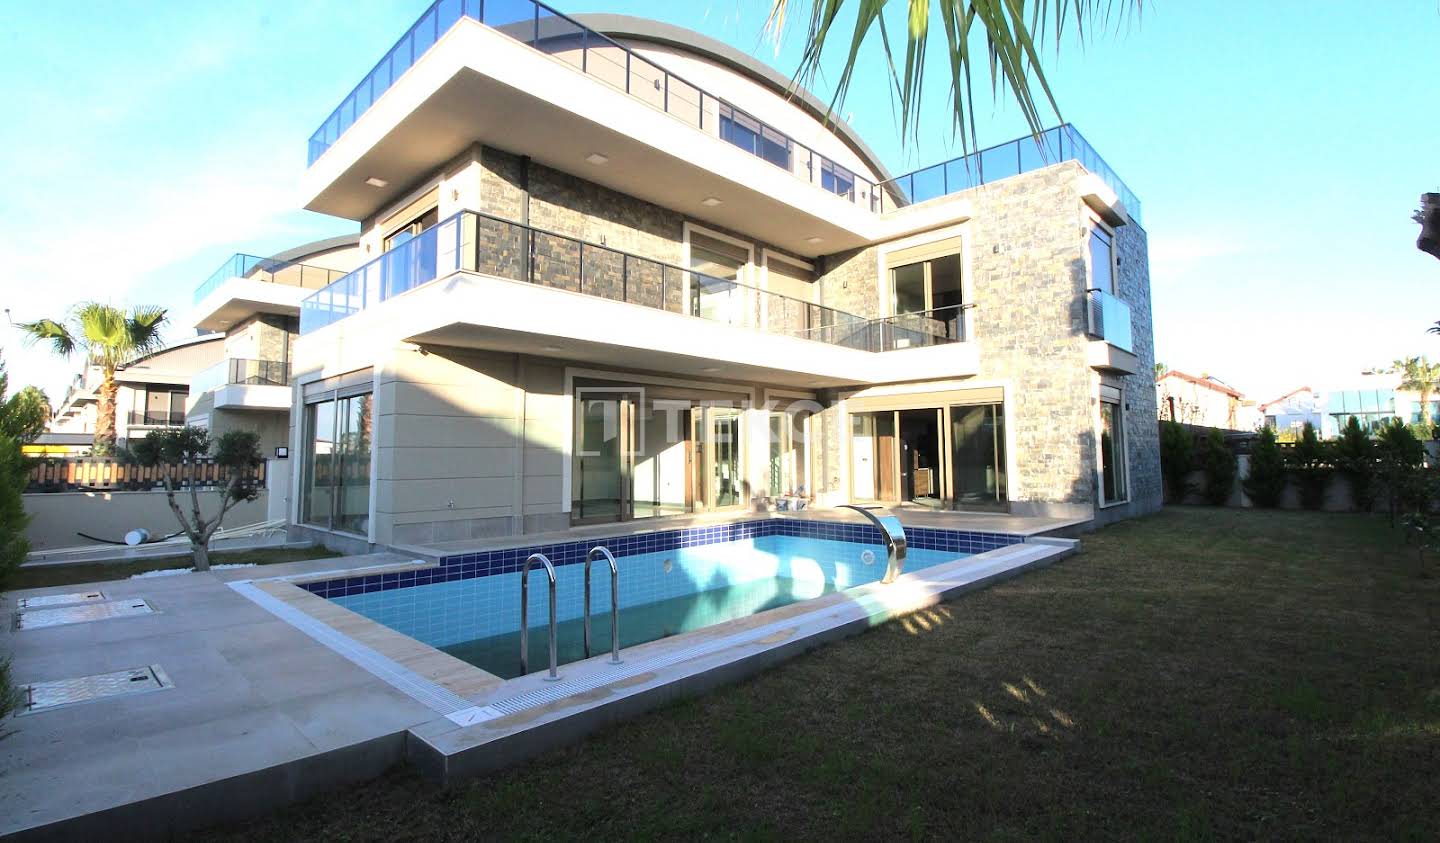 House with pool and terrace Antalya